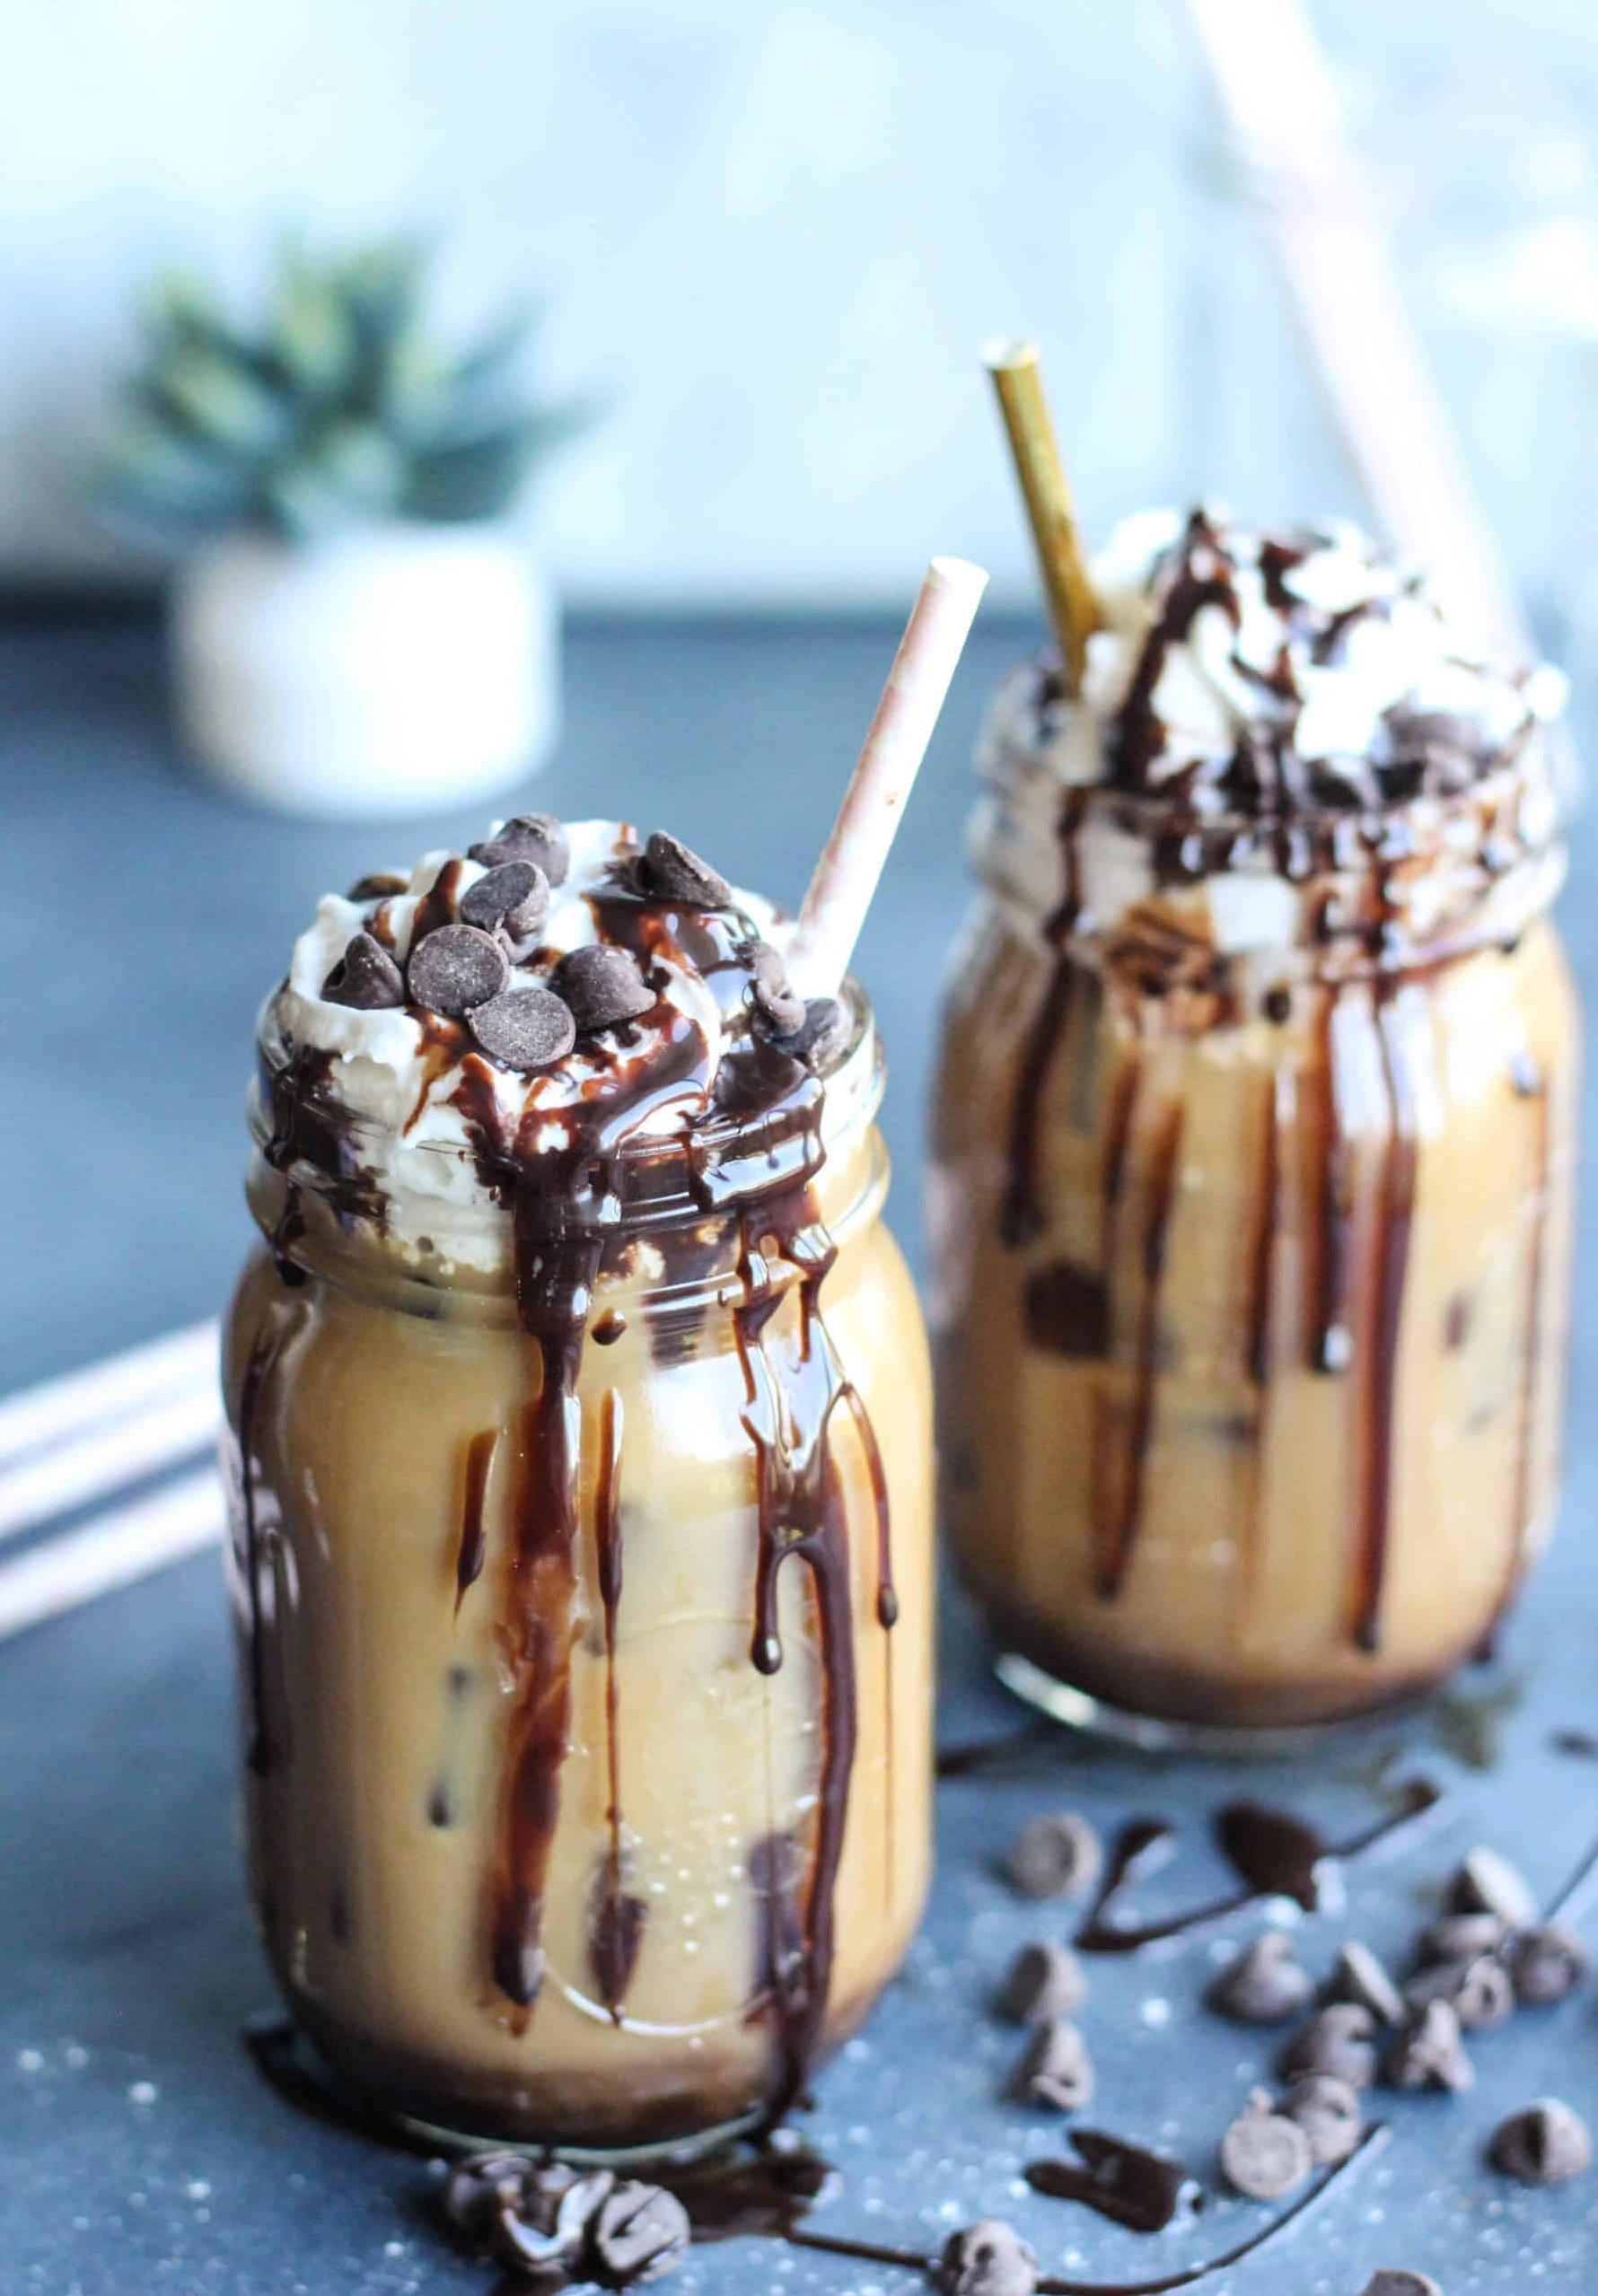  Iced coffee lovers, this one's for you.